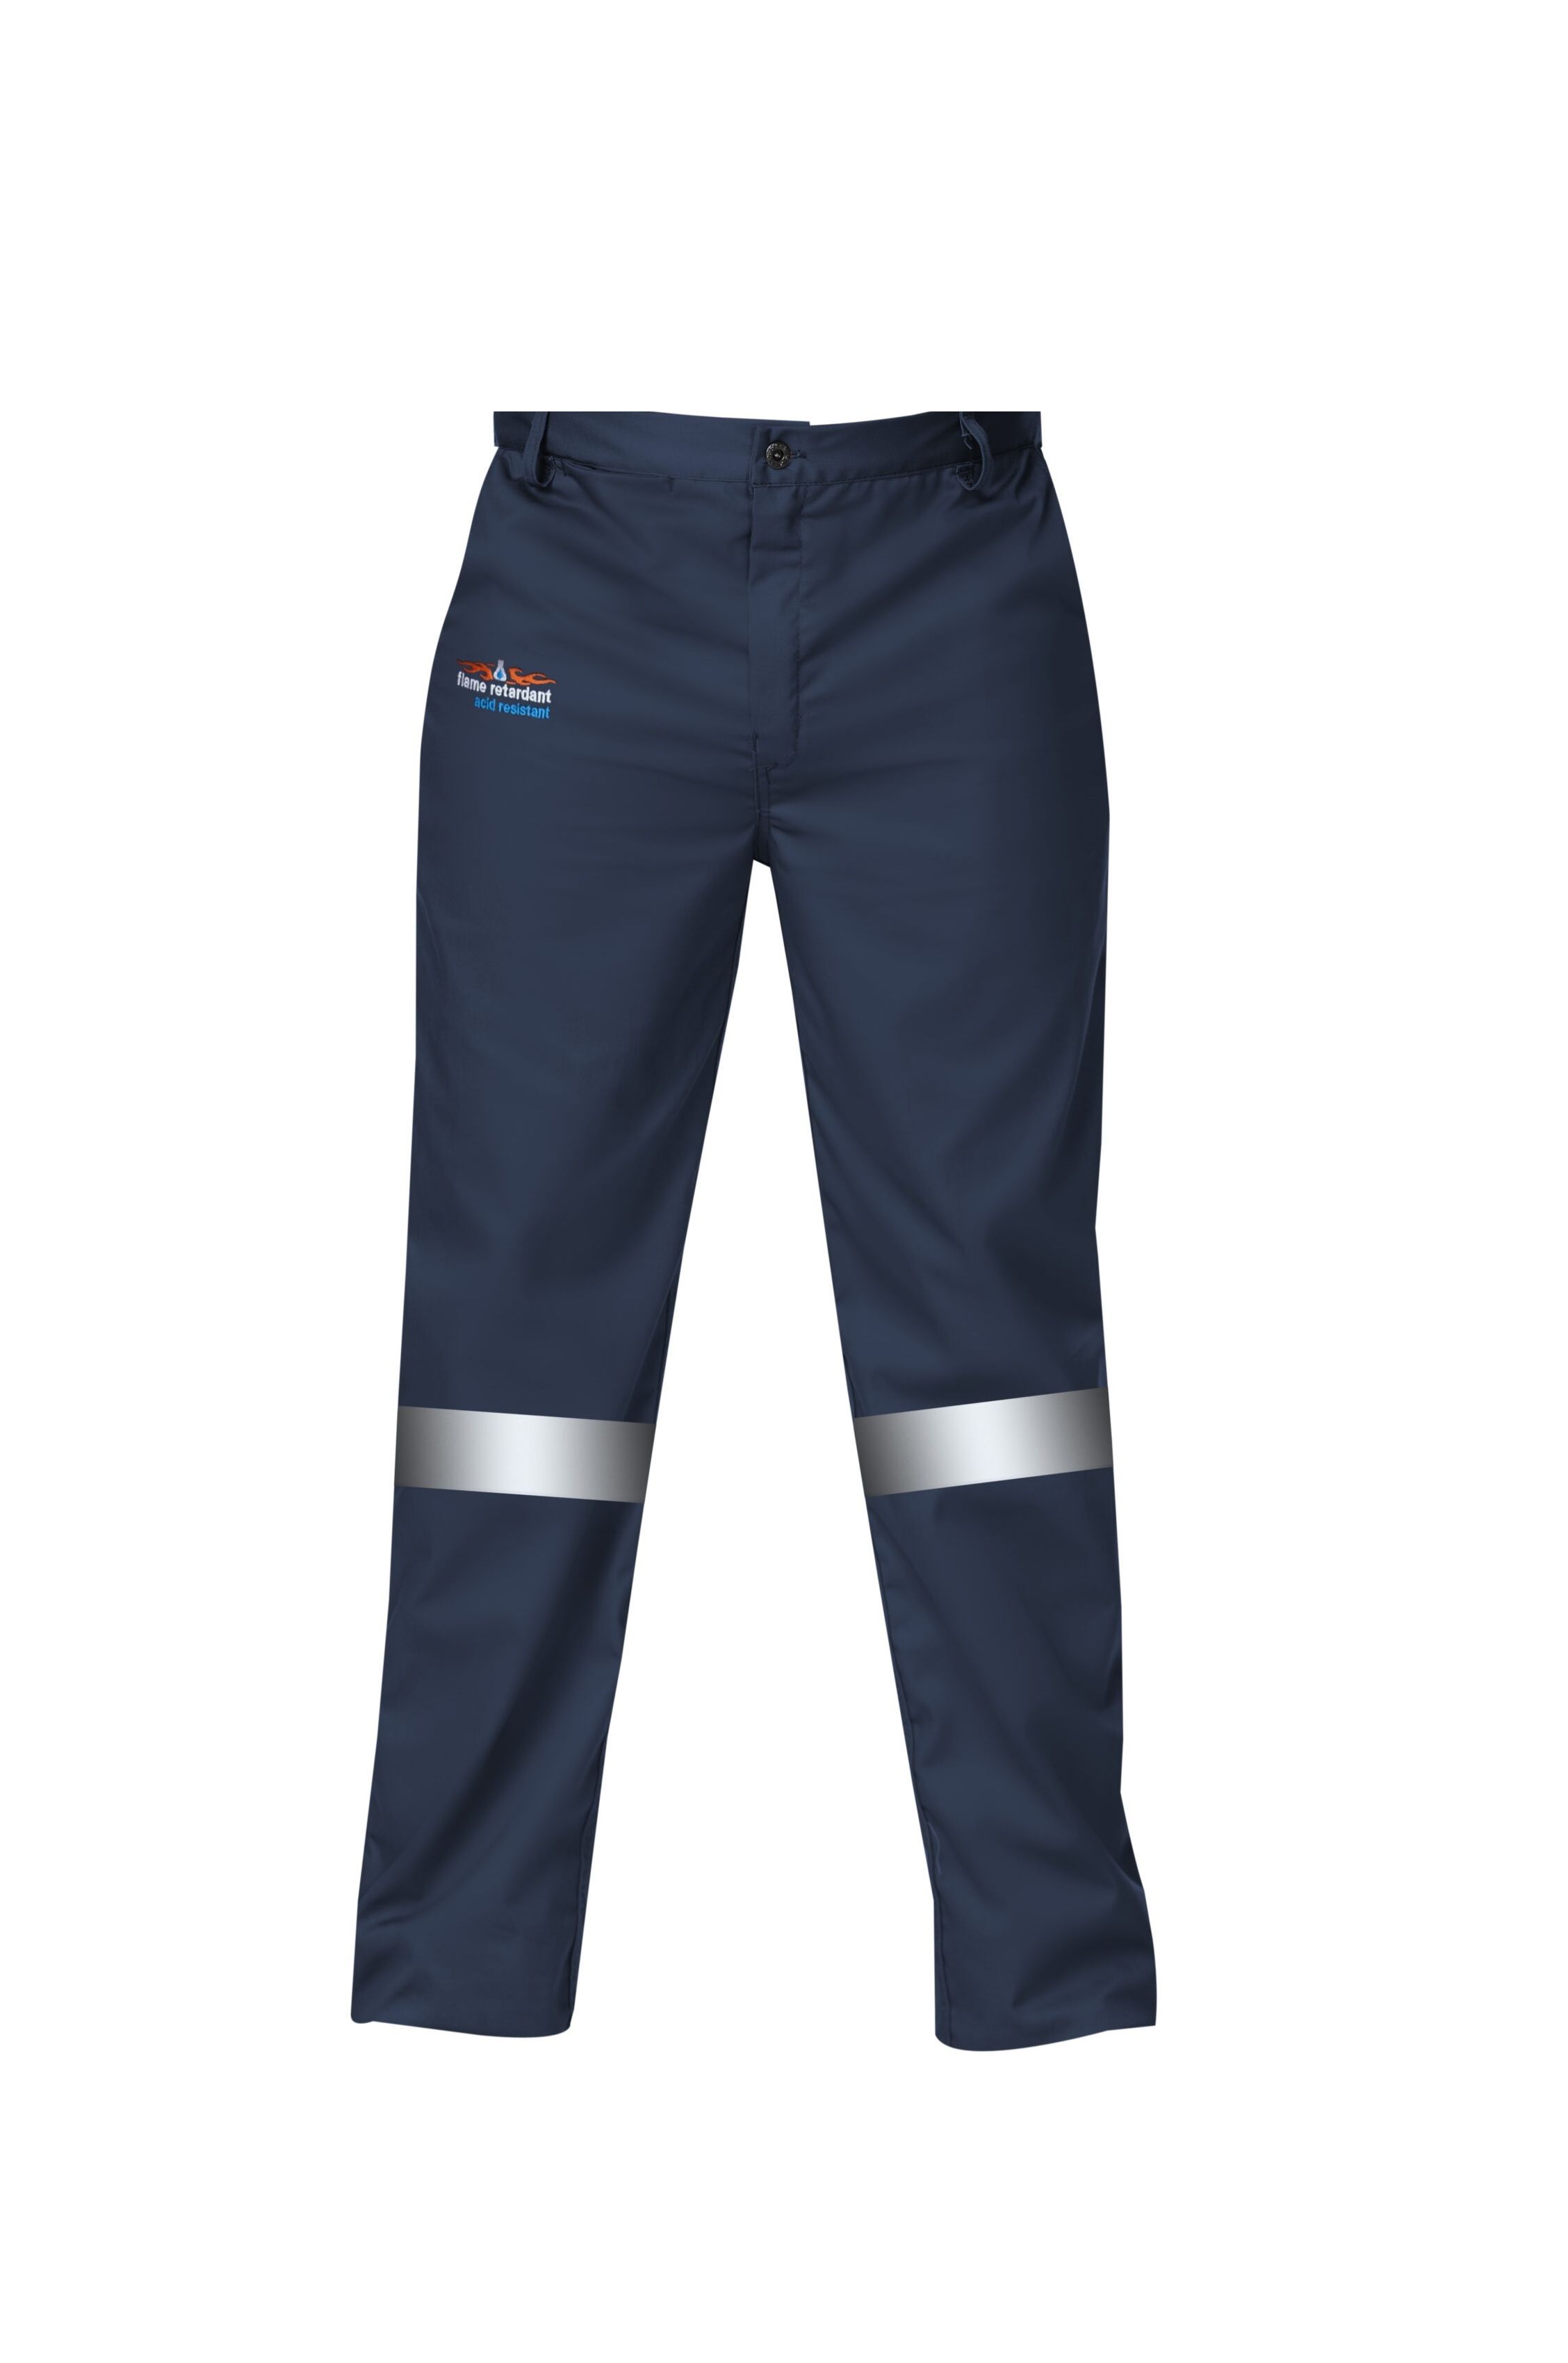 Endurance Navy Blue D59 Flame/Acid Conti Pants (with Reflective) Size 36